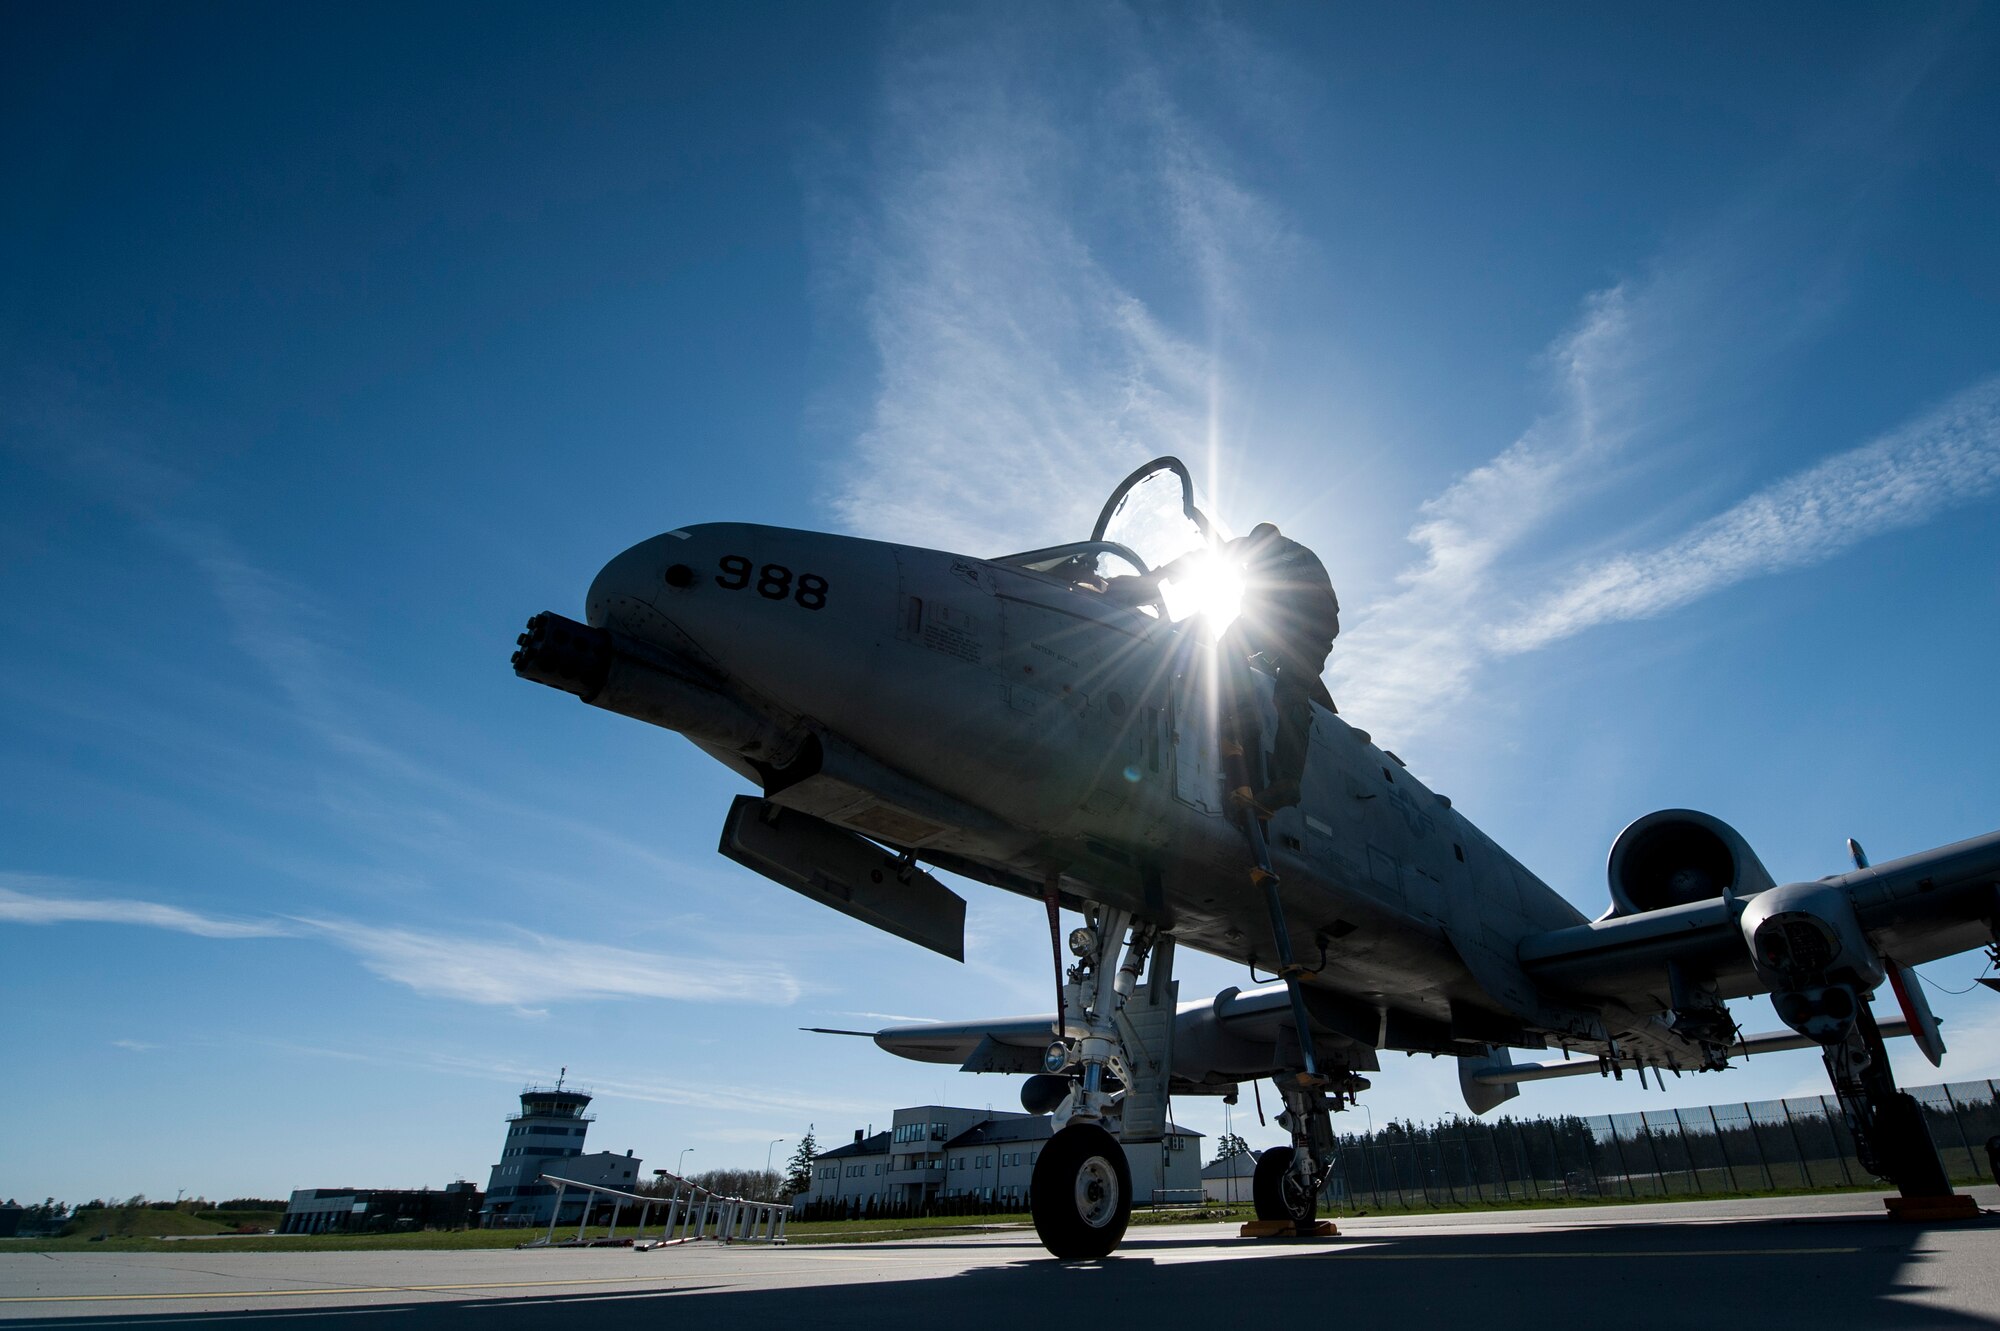 A 354th Expeditionary Fighter Squadron pilot climbs into a A-10 Thunderbolt II attack aircraft during a theater security package deployment at Ämari Air Base, Estonia. The U.S. Air Force's forward presence in Europe allows for the opportunity to work with NATO allies and partners to develop and improve ready air forces capable of maintaining regional security. (U.S. Air Force photo by Senior Airman Rusty Frank/Released)